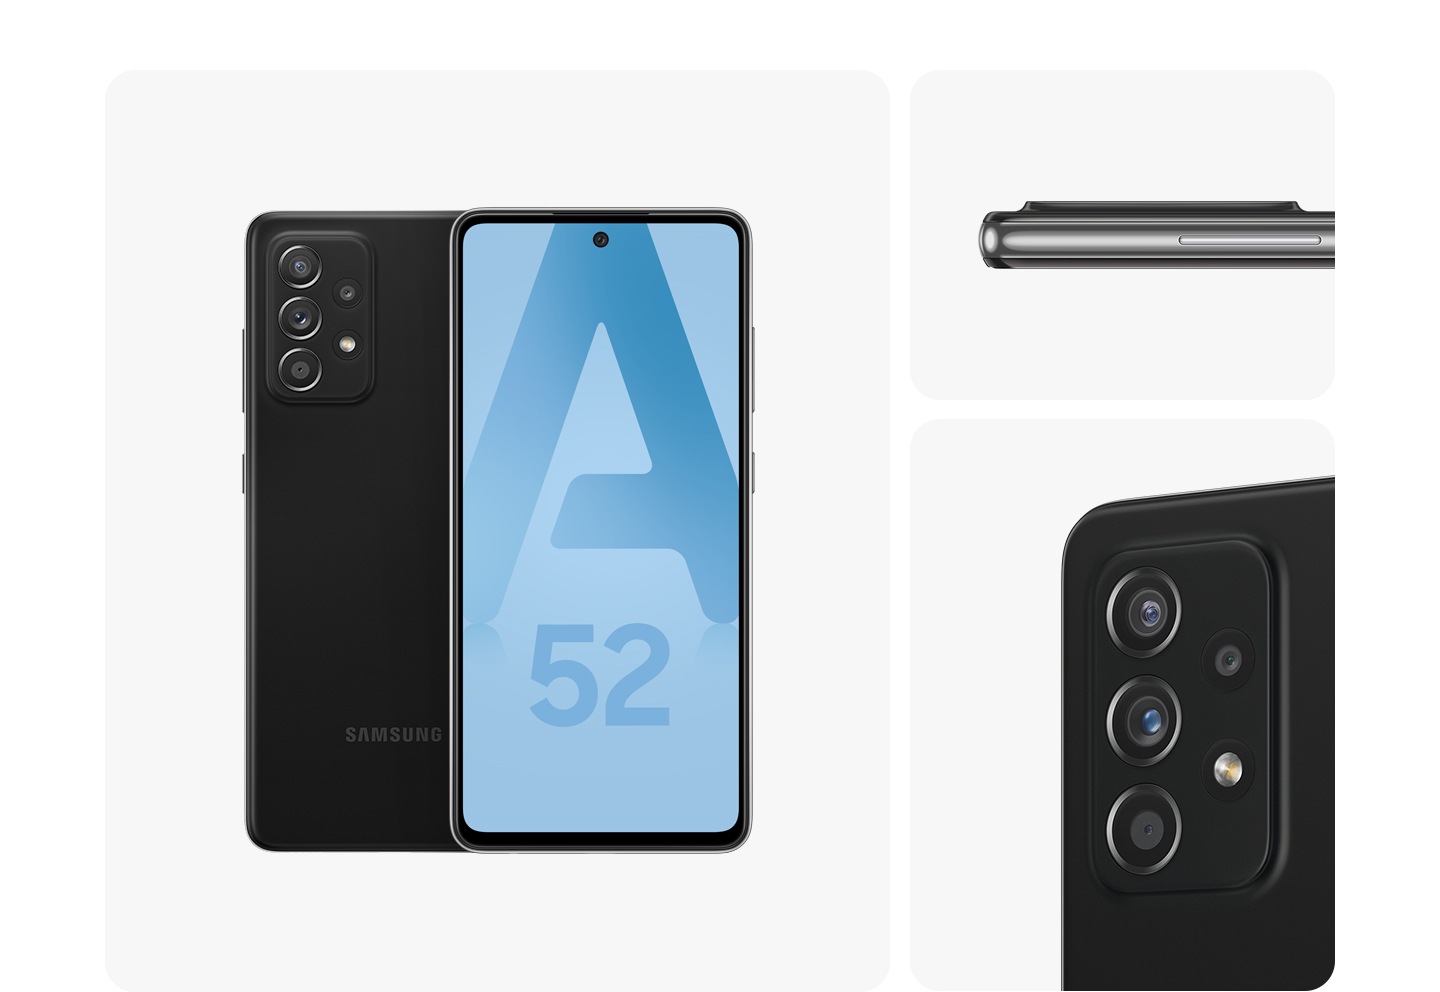 2. BlackGalaxy A52 in Awesome Black, seen from multiple angles to show the design: rear, front, side and close-up on the rear camera.